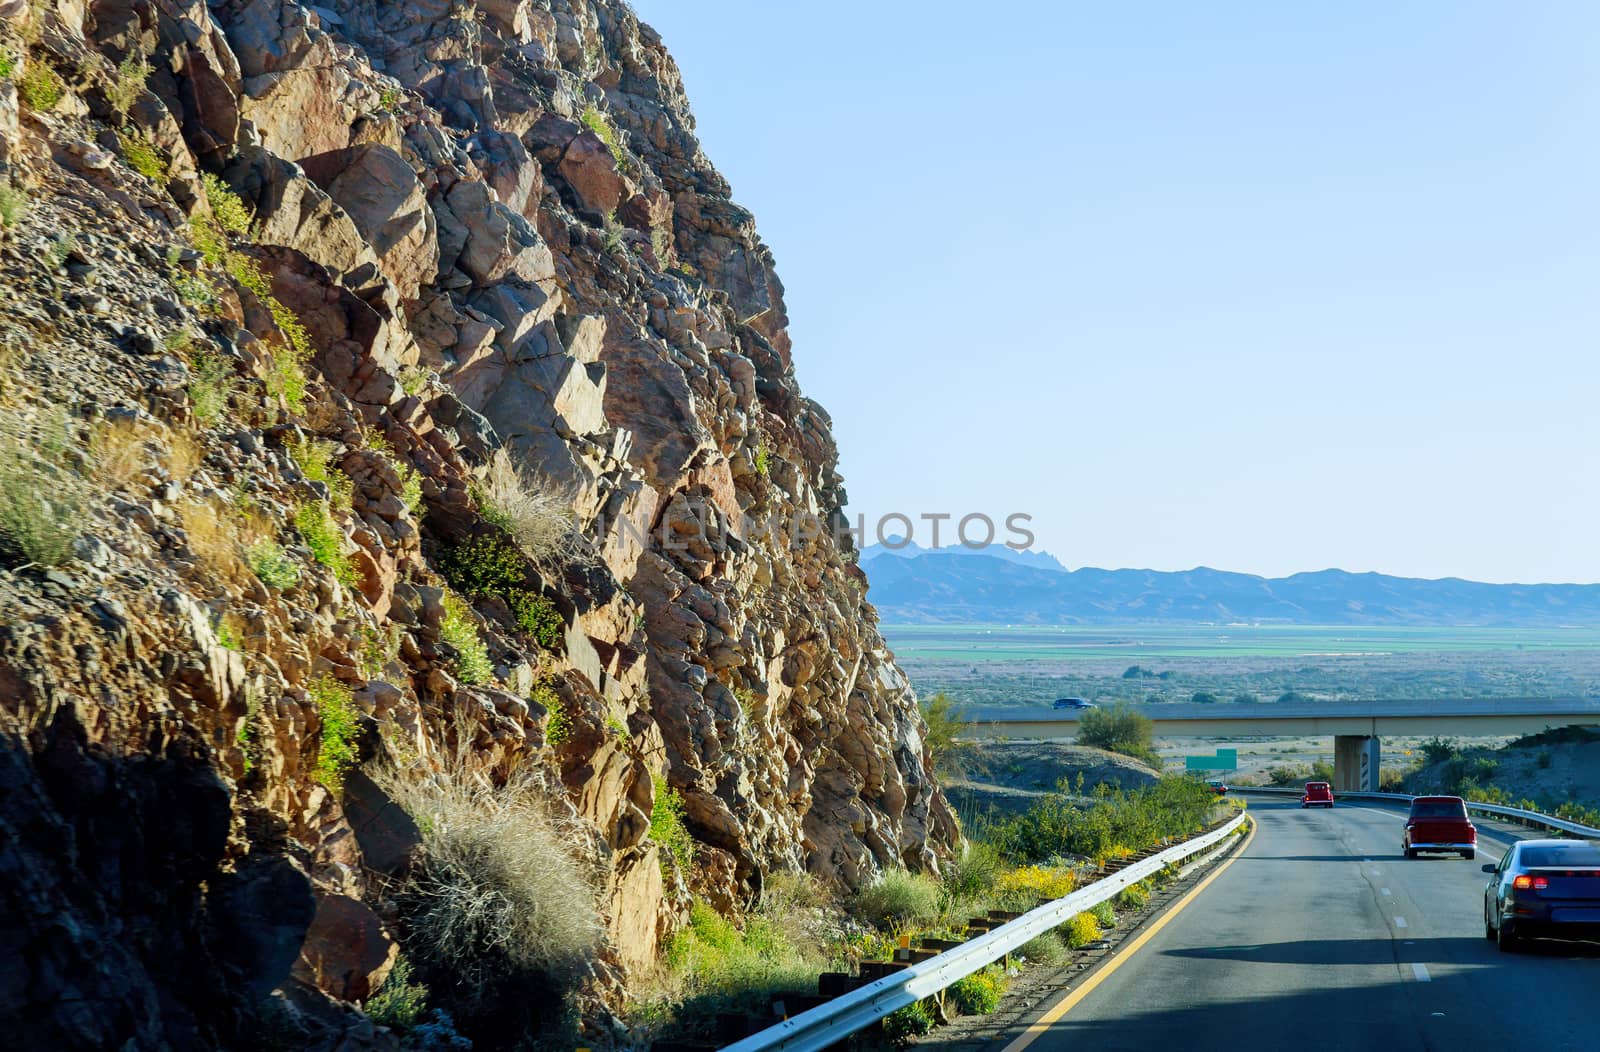 View of a road in desert with rock mountain highway New Mexico landscape